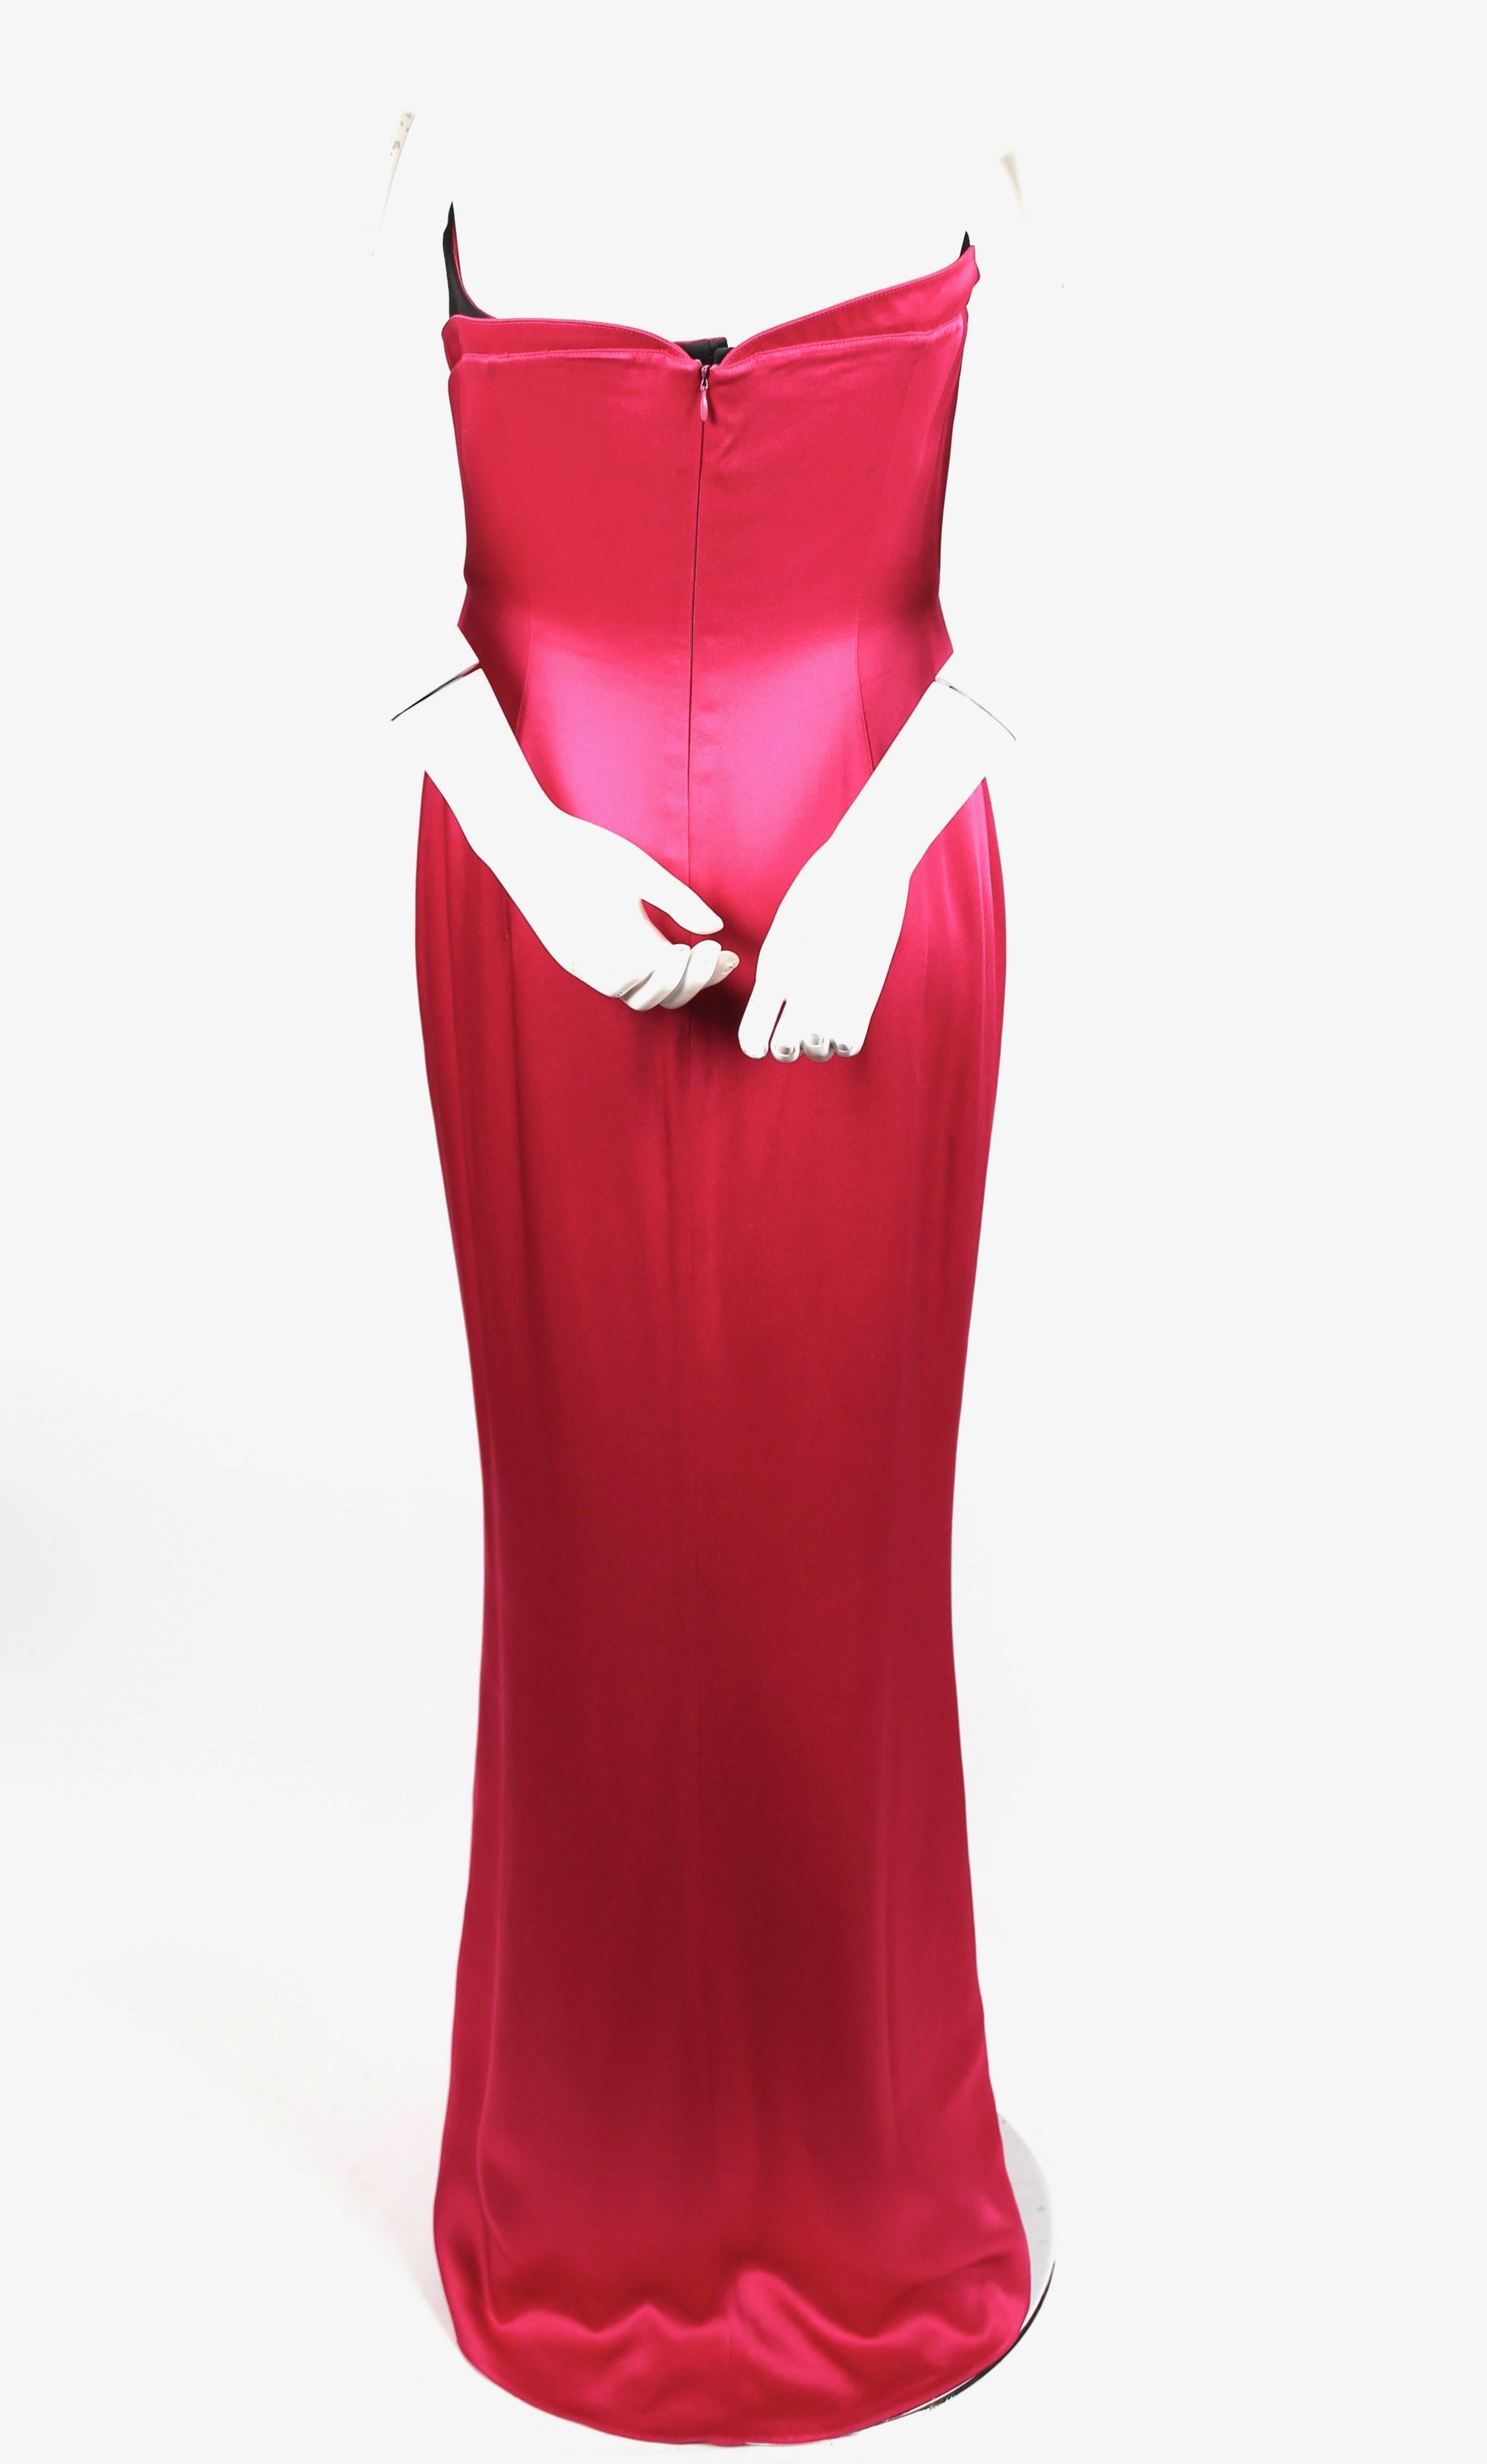 Women's Thierry Mugler fuchsia charmeuse gown with black bodice, 1990s 